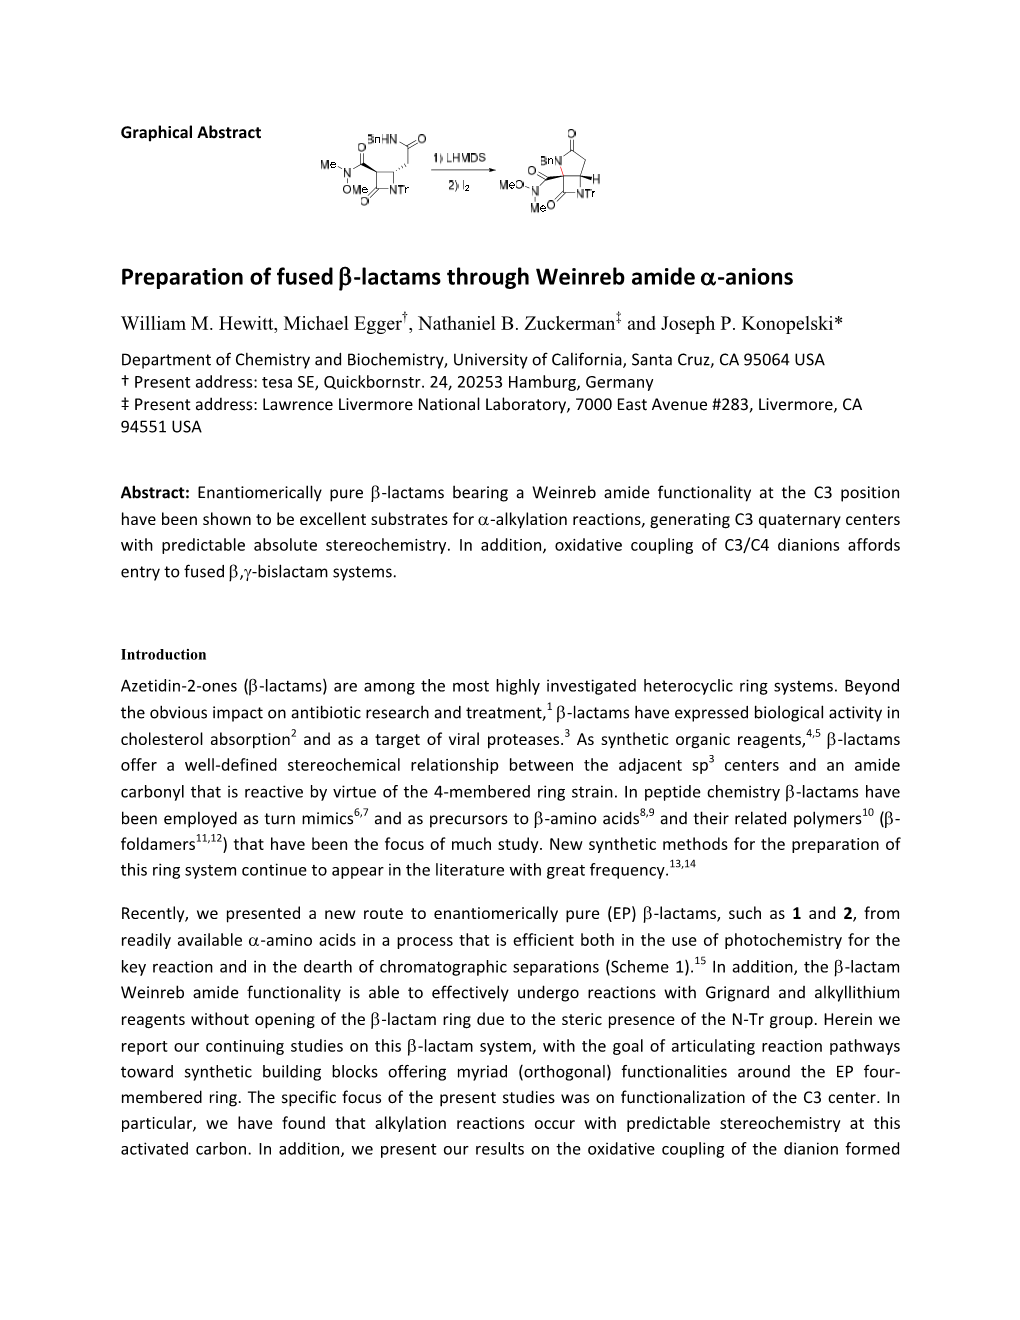 Preparation of Fused Β-Lactams Through Weinreb Amide Α-Anions